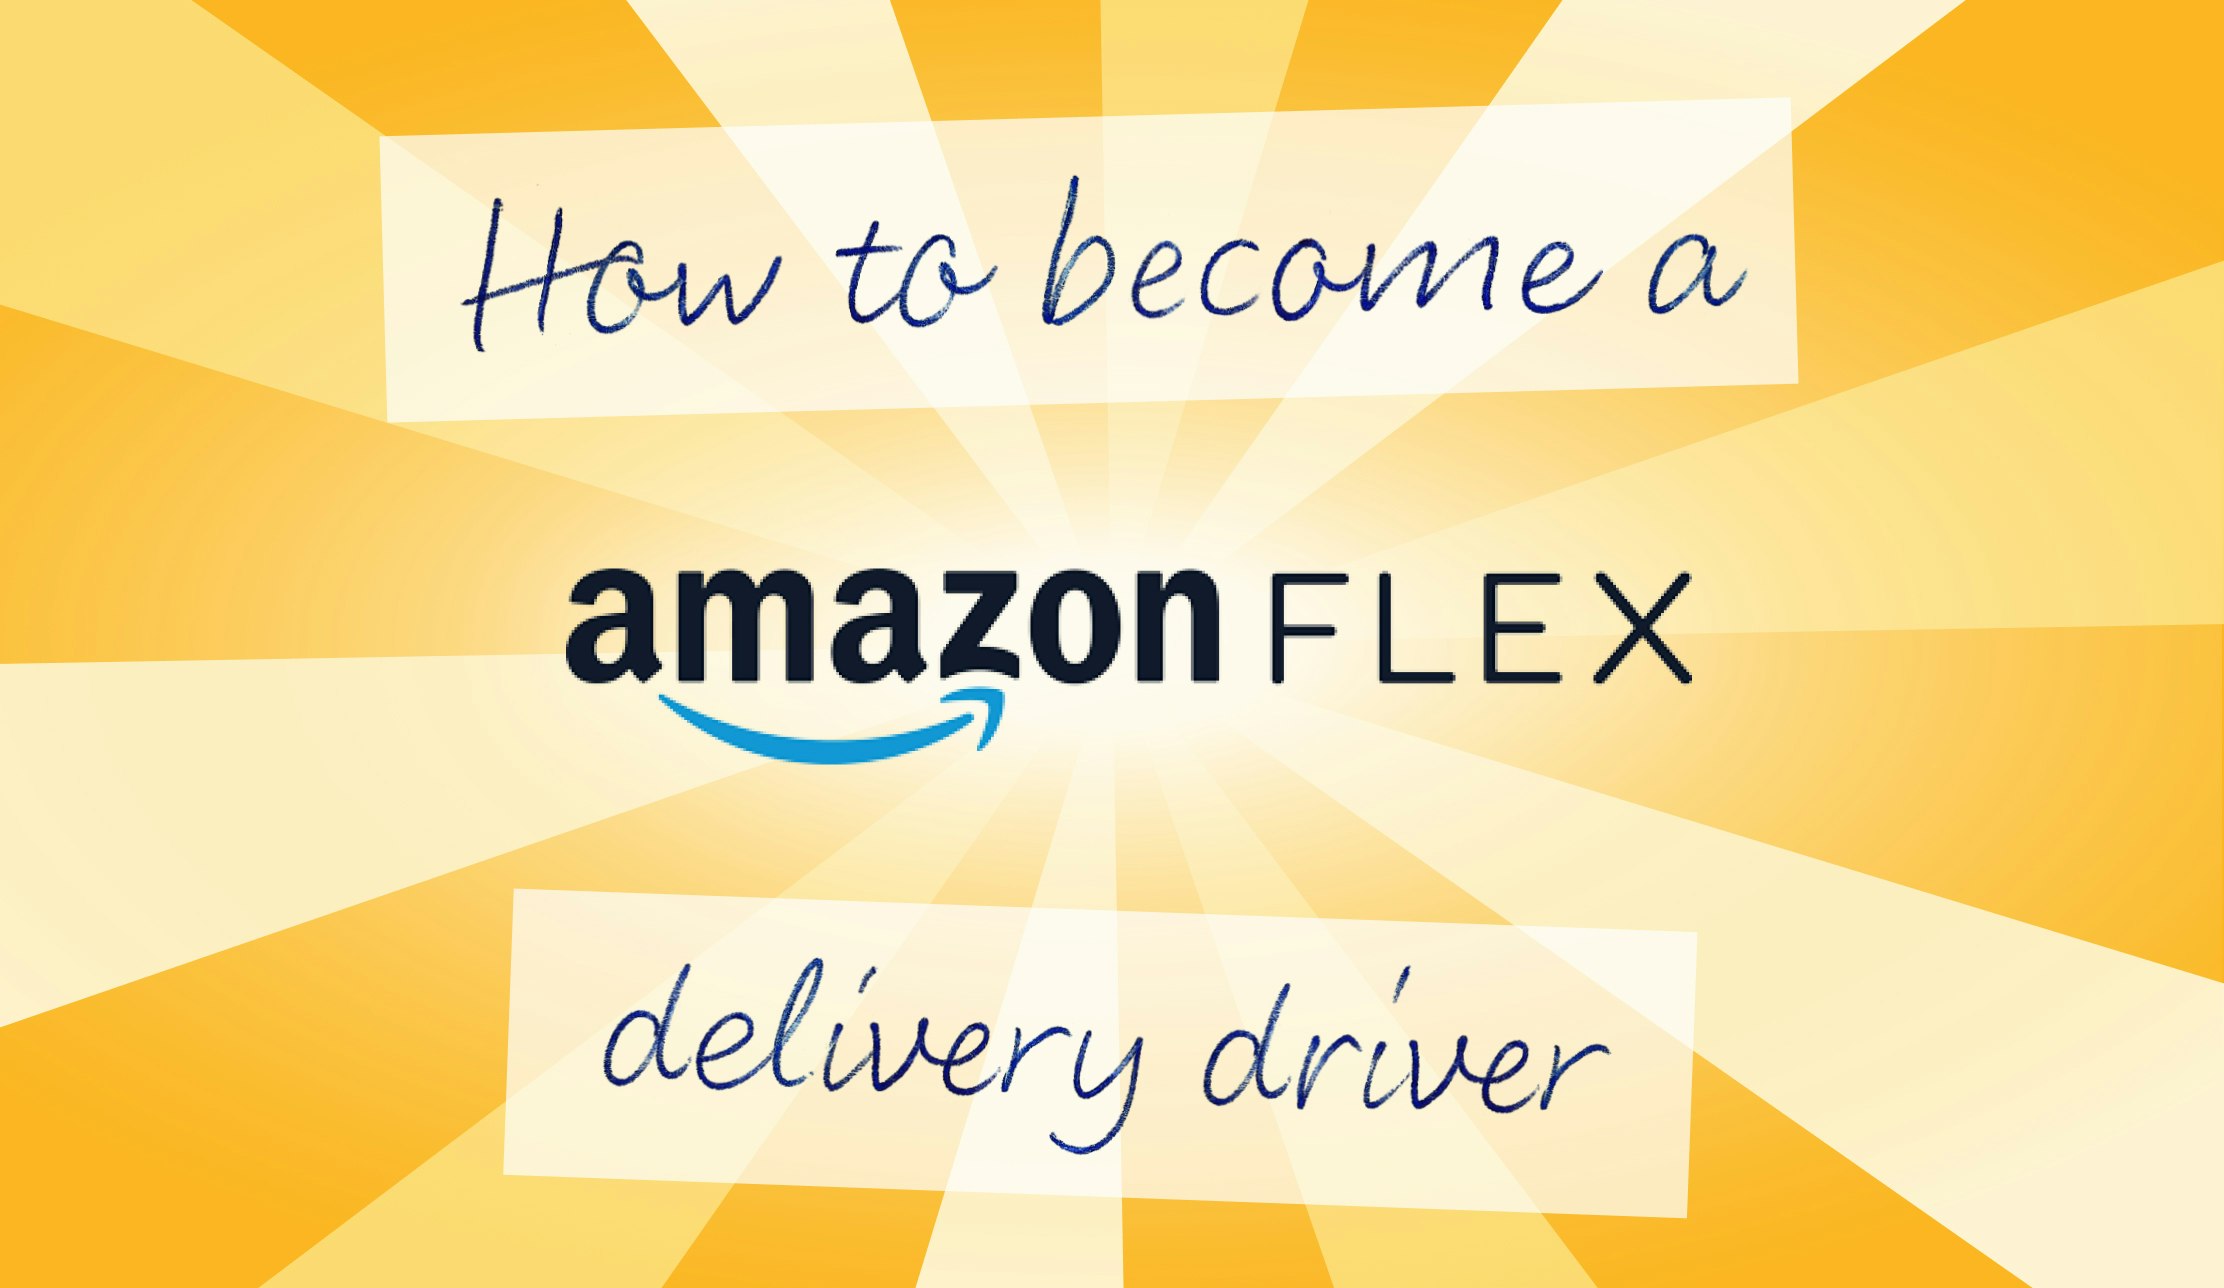 How to become an Amazon Flex delivery driver